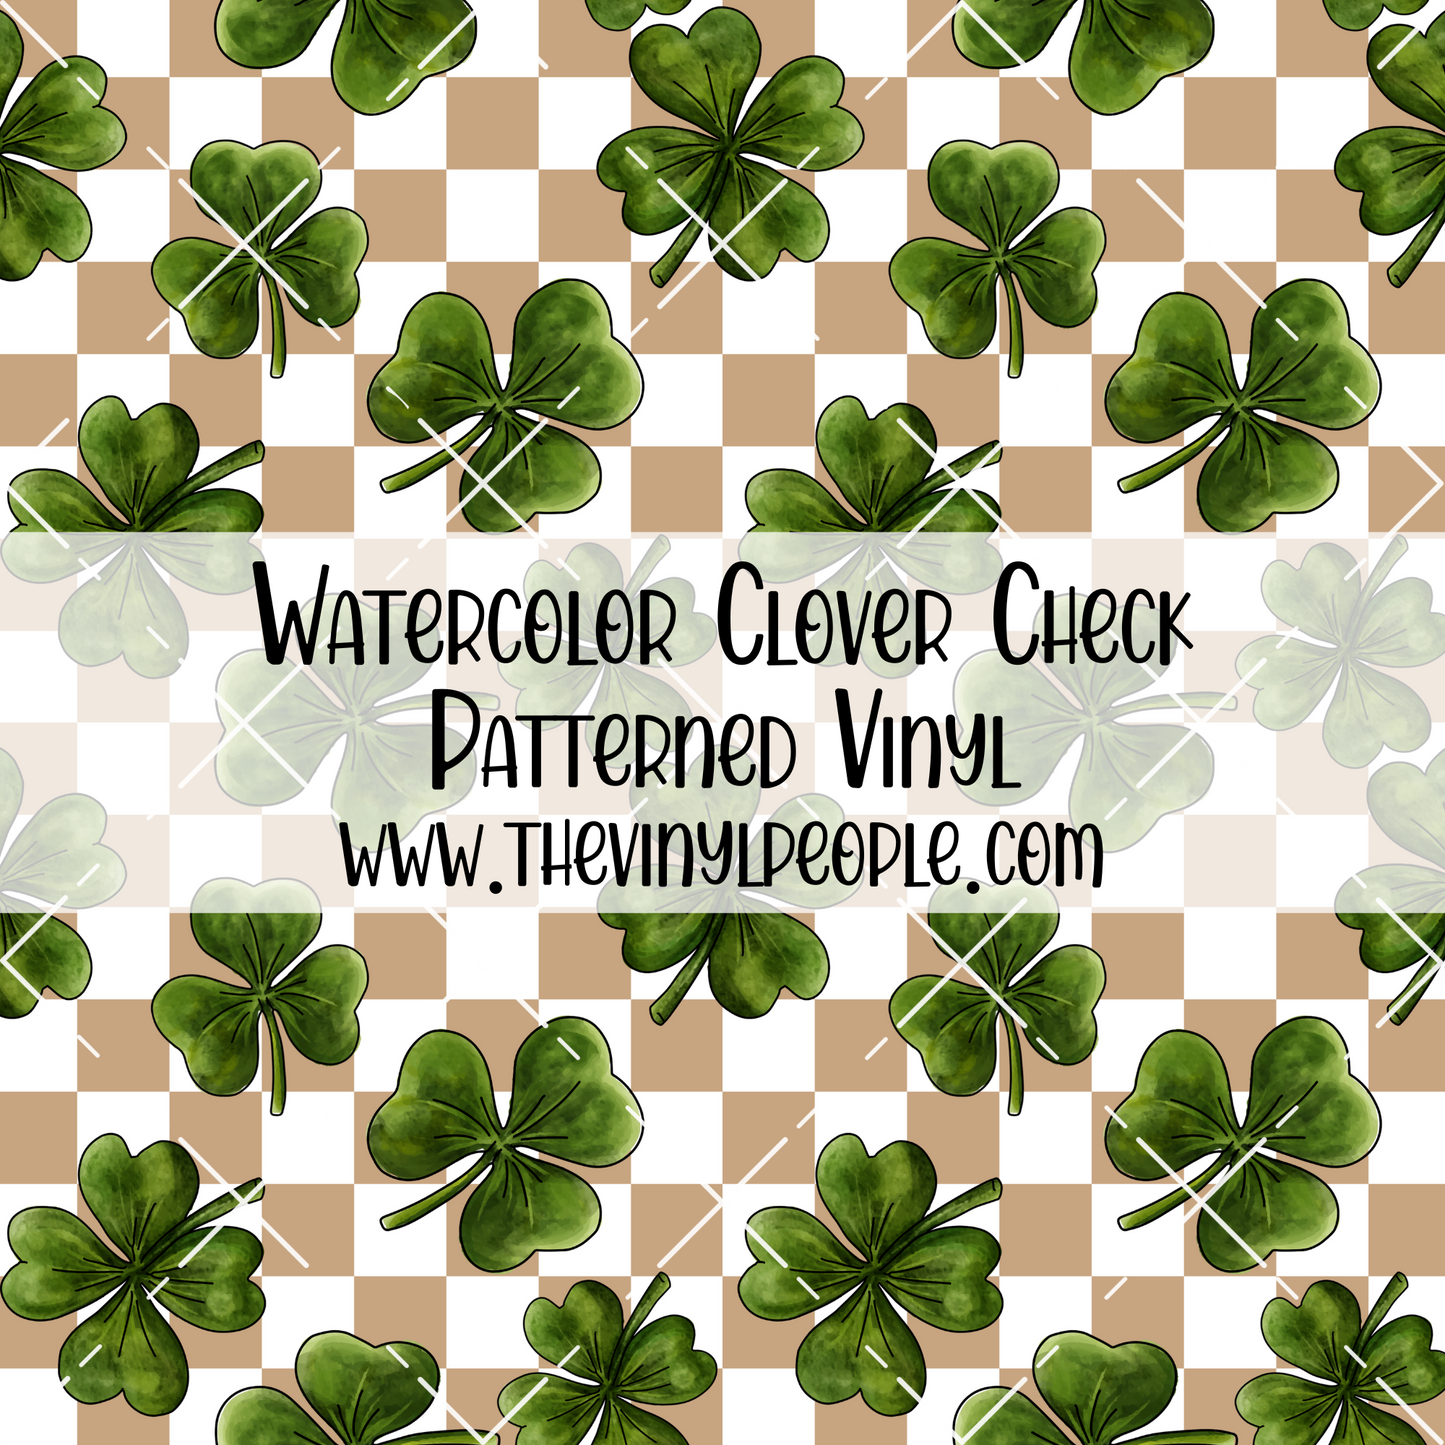 Watercolor Clover Check Patterned Vinyl